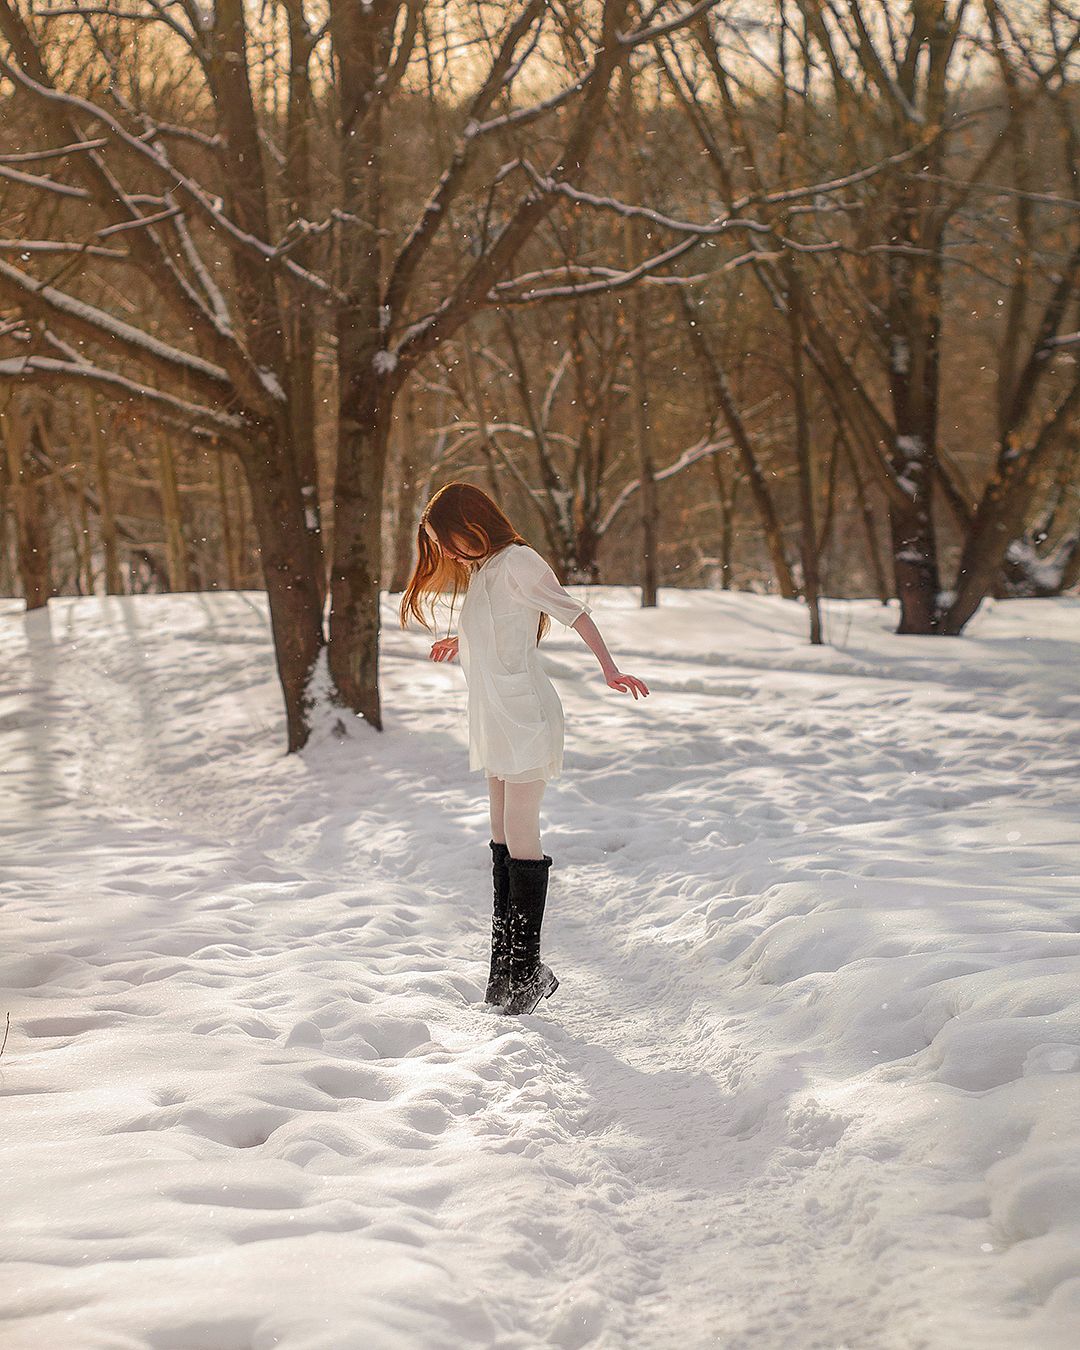 snow,sunny,day,winter,tale,dream,girl,female,people,forest,portrait,street,  Kerry Moore